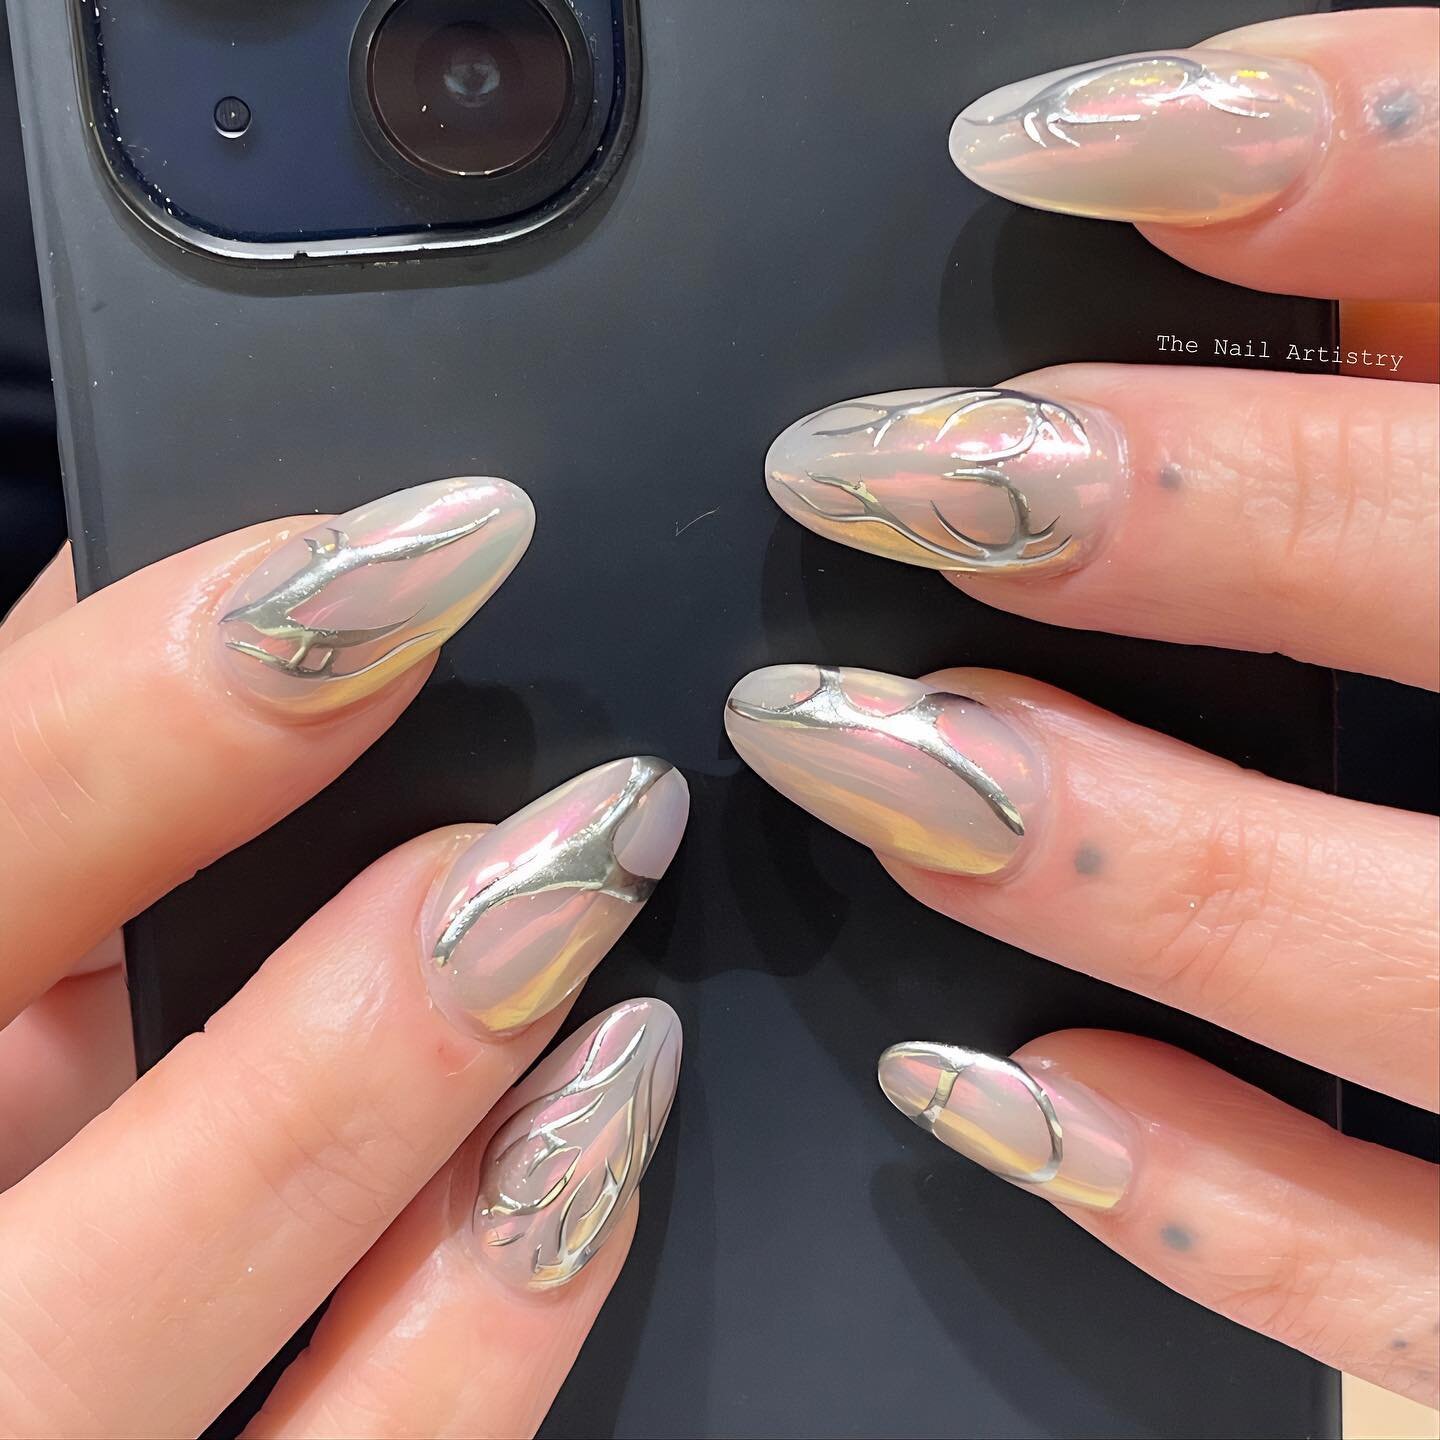 Aura Chrome x Metallic Arts ⛓️🫧

Drop A Heart or Comment below to let us know if you love this set ✨💫

📲 Walk-in and Appointments are welcome
☎️ Call us 020 7018 6636 for any enquiries 
📍5 Minutes from Covent Gardens or Leicester Square Station
.